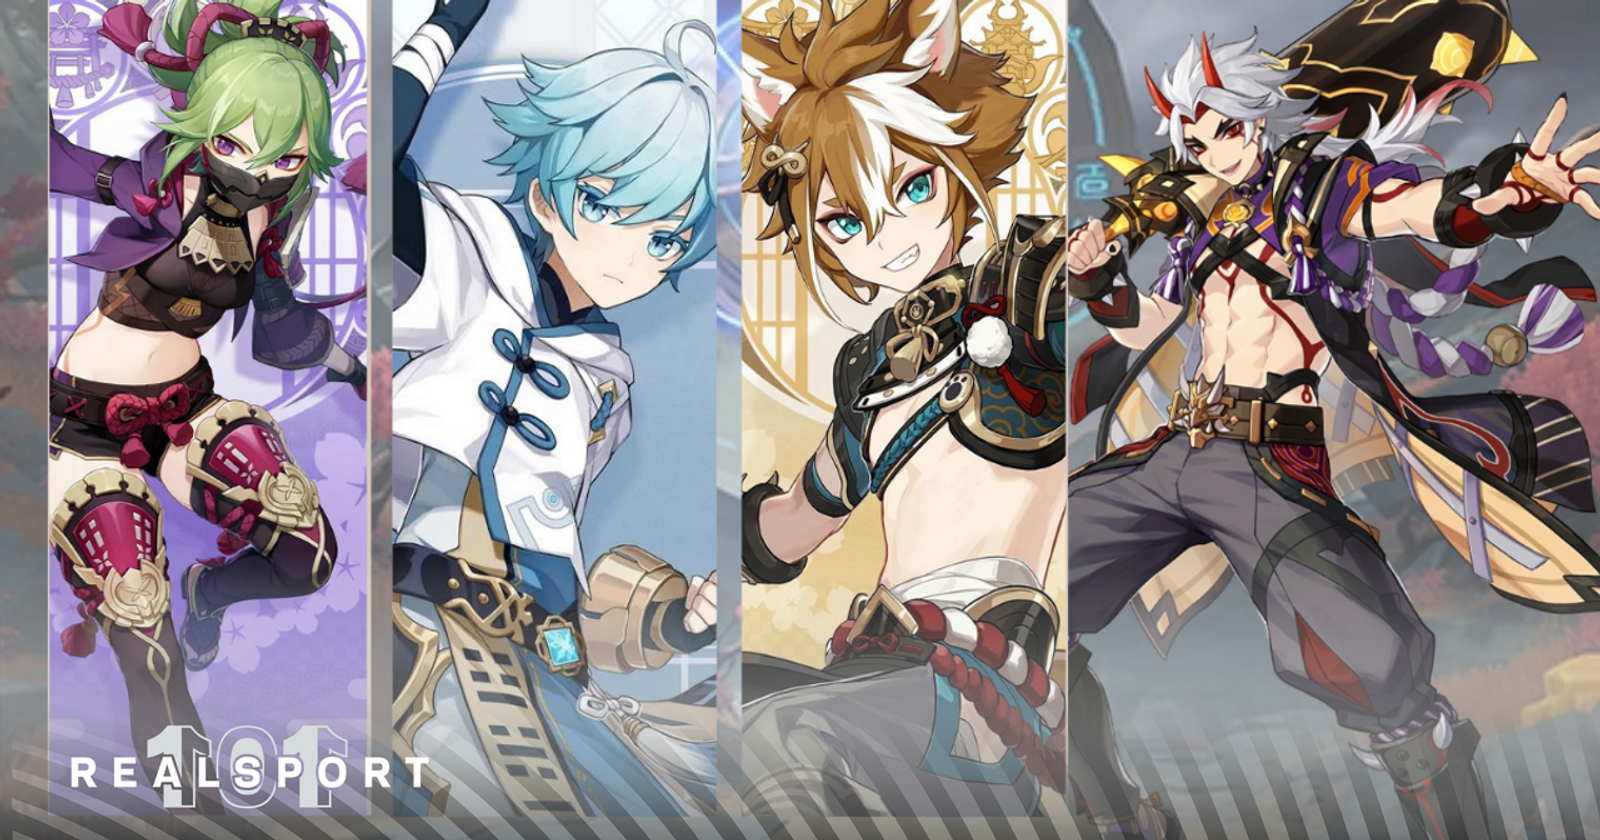 Genshin, Banner For Arataki Itto Release Date & Featured Characters